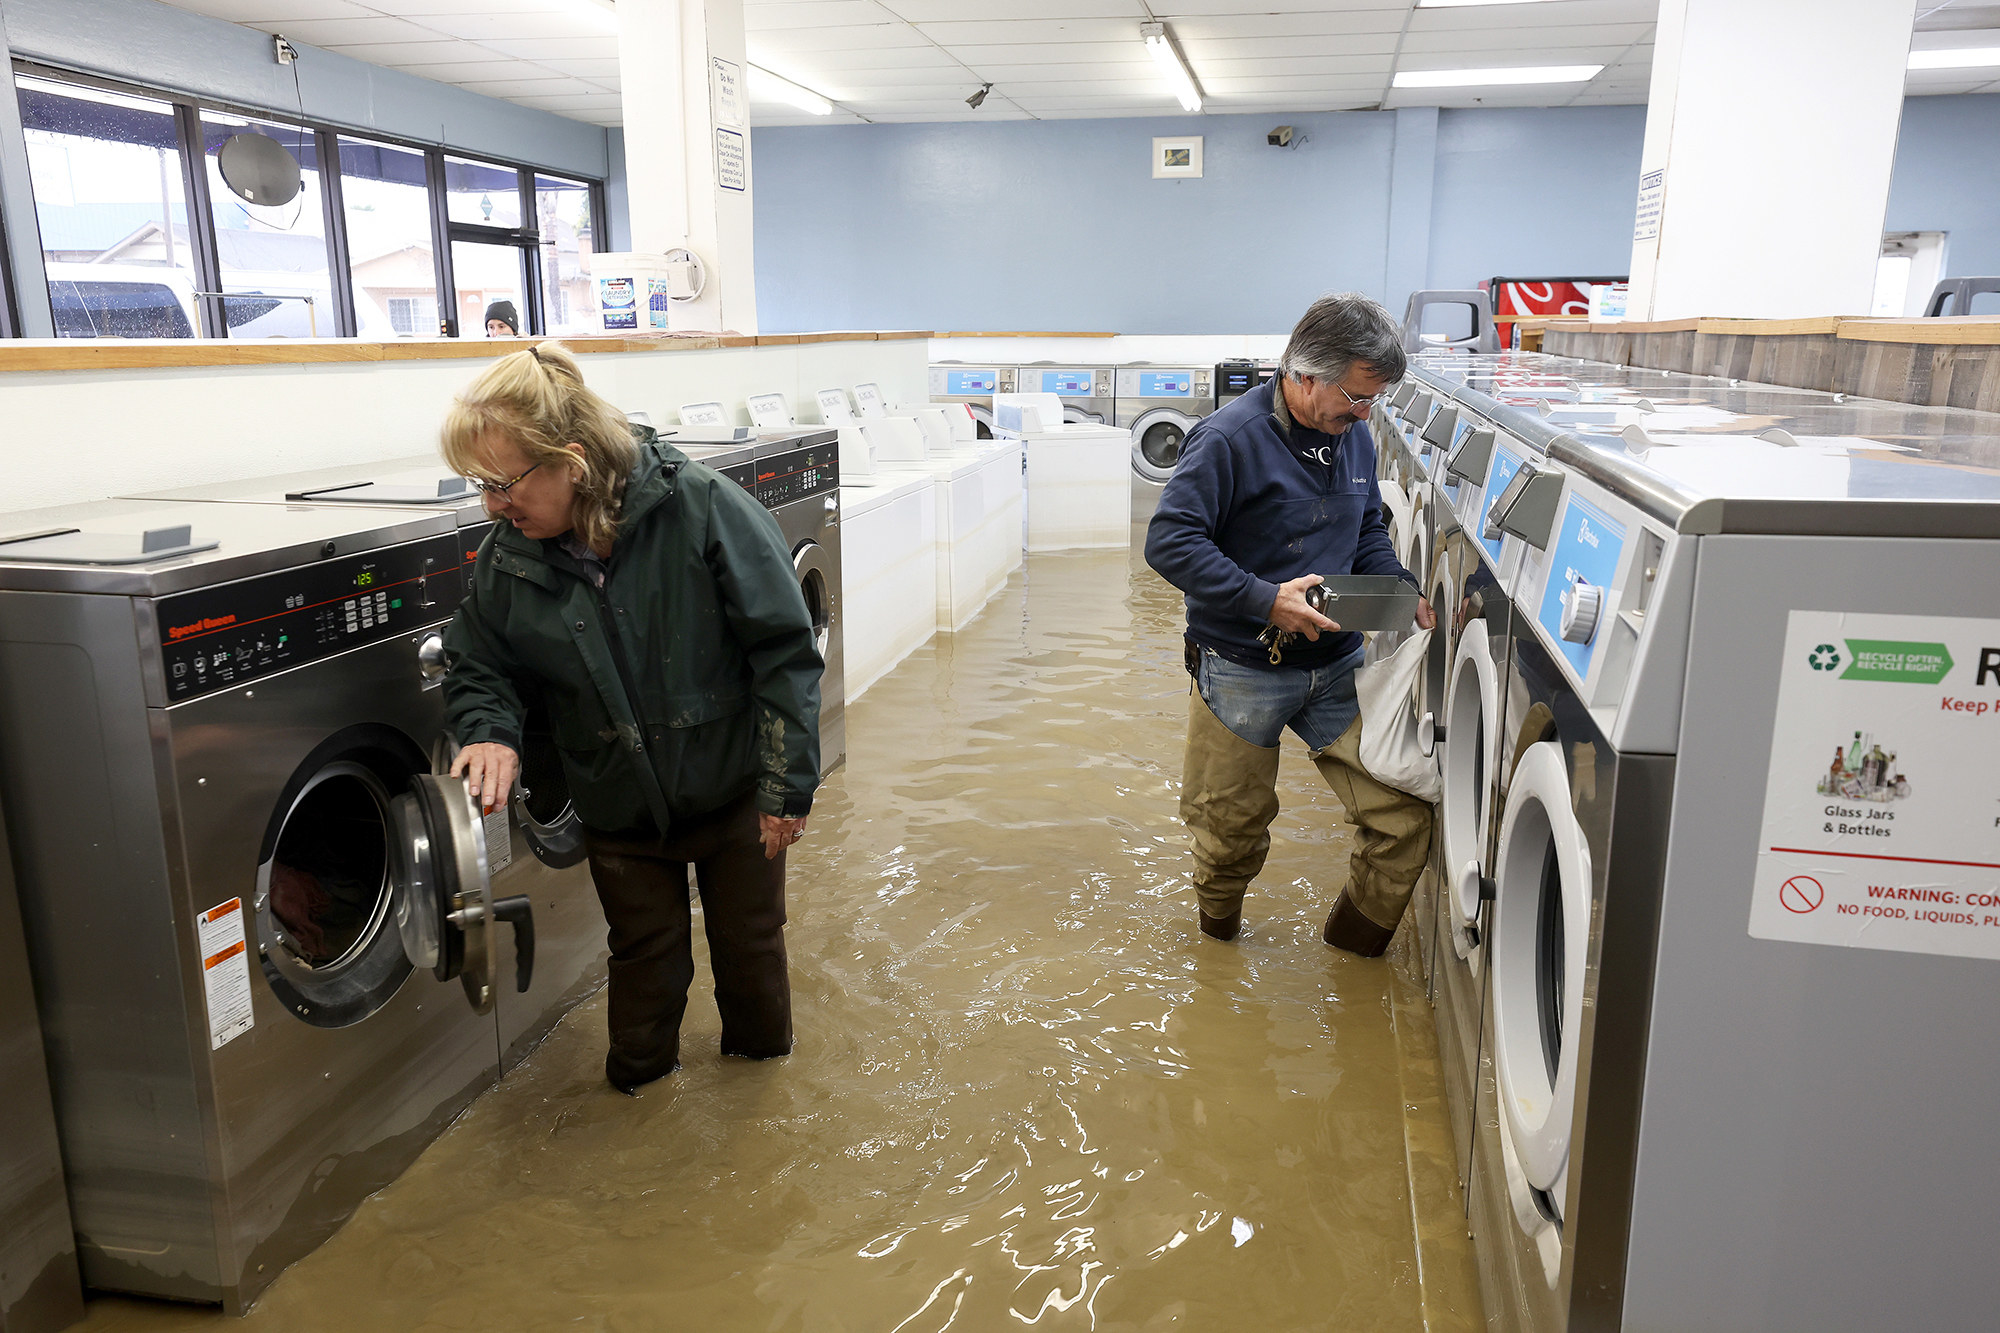 two people examine laundry machines at a flooded laundromat